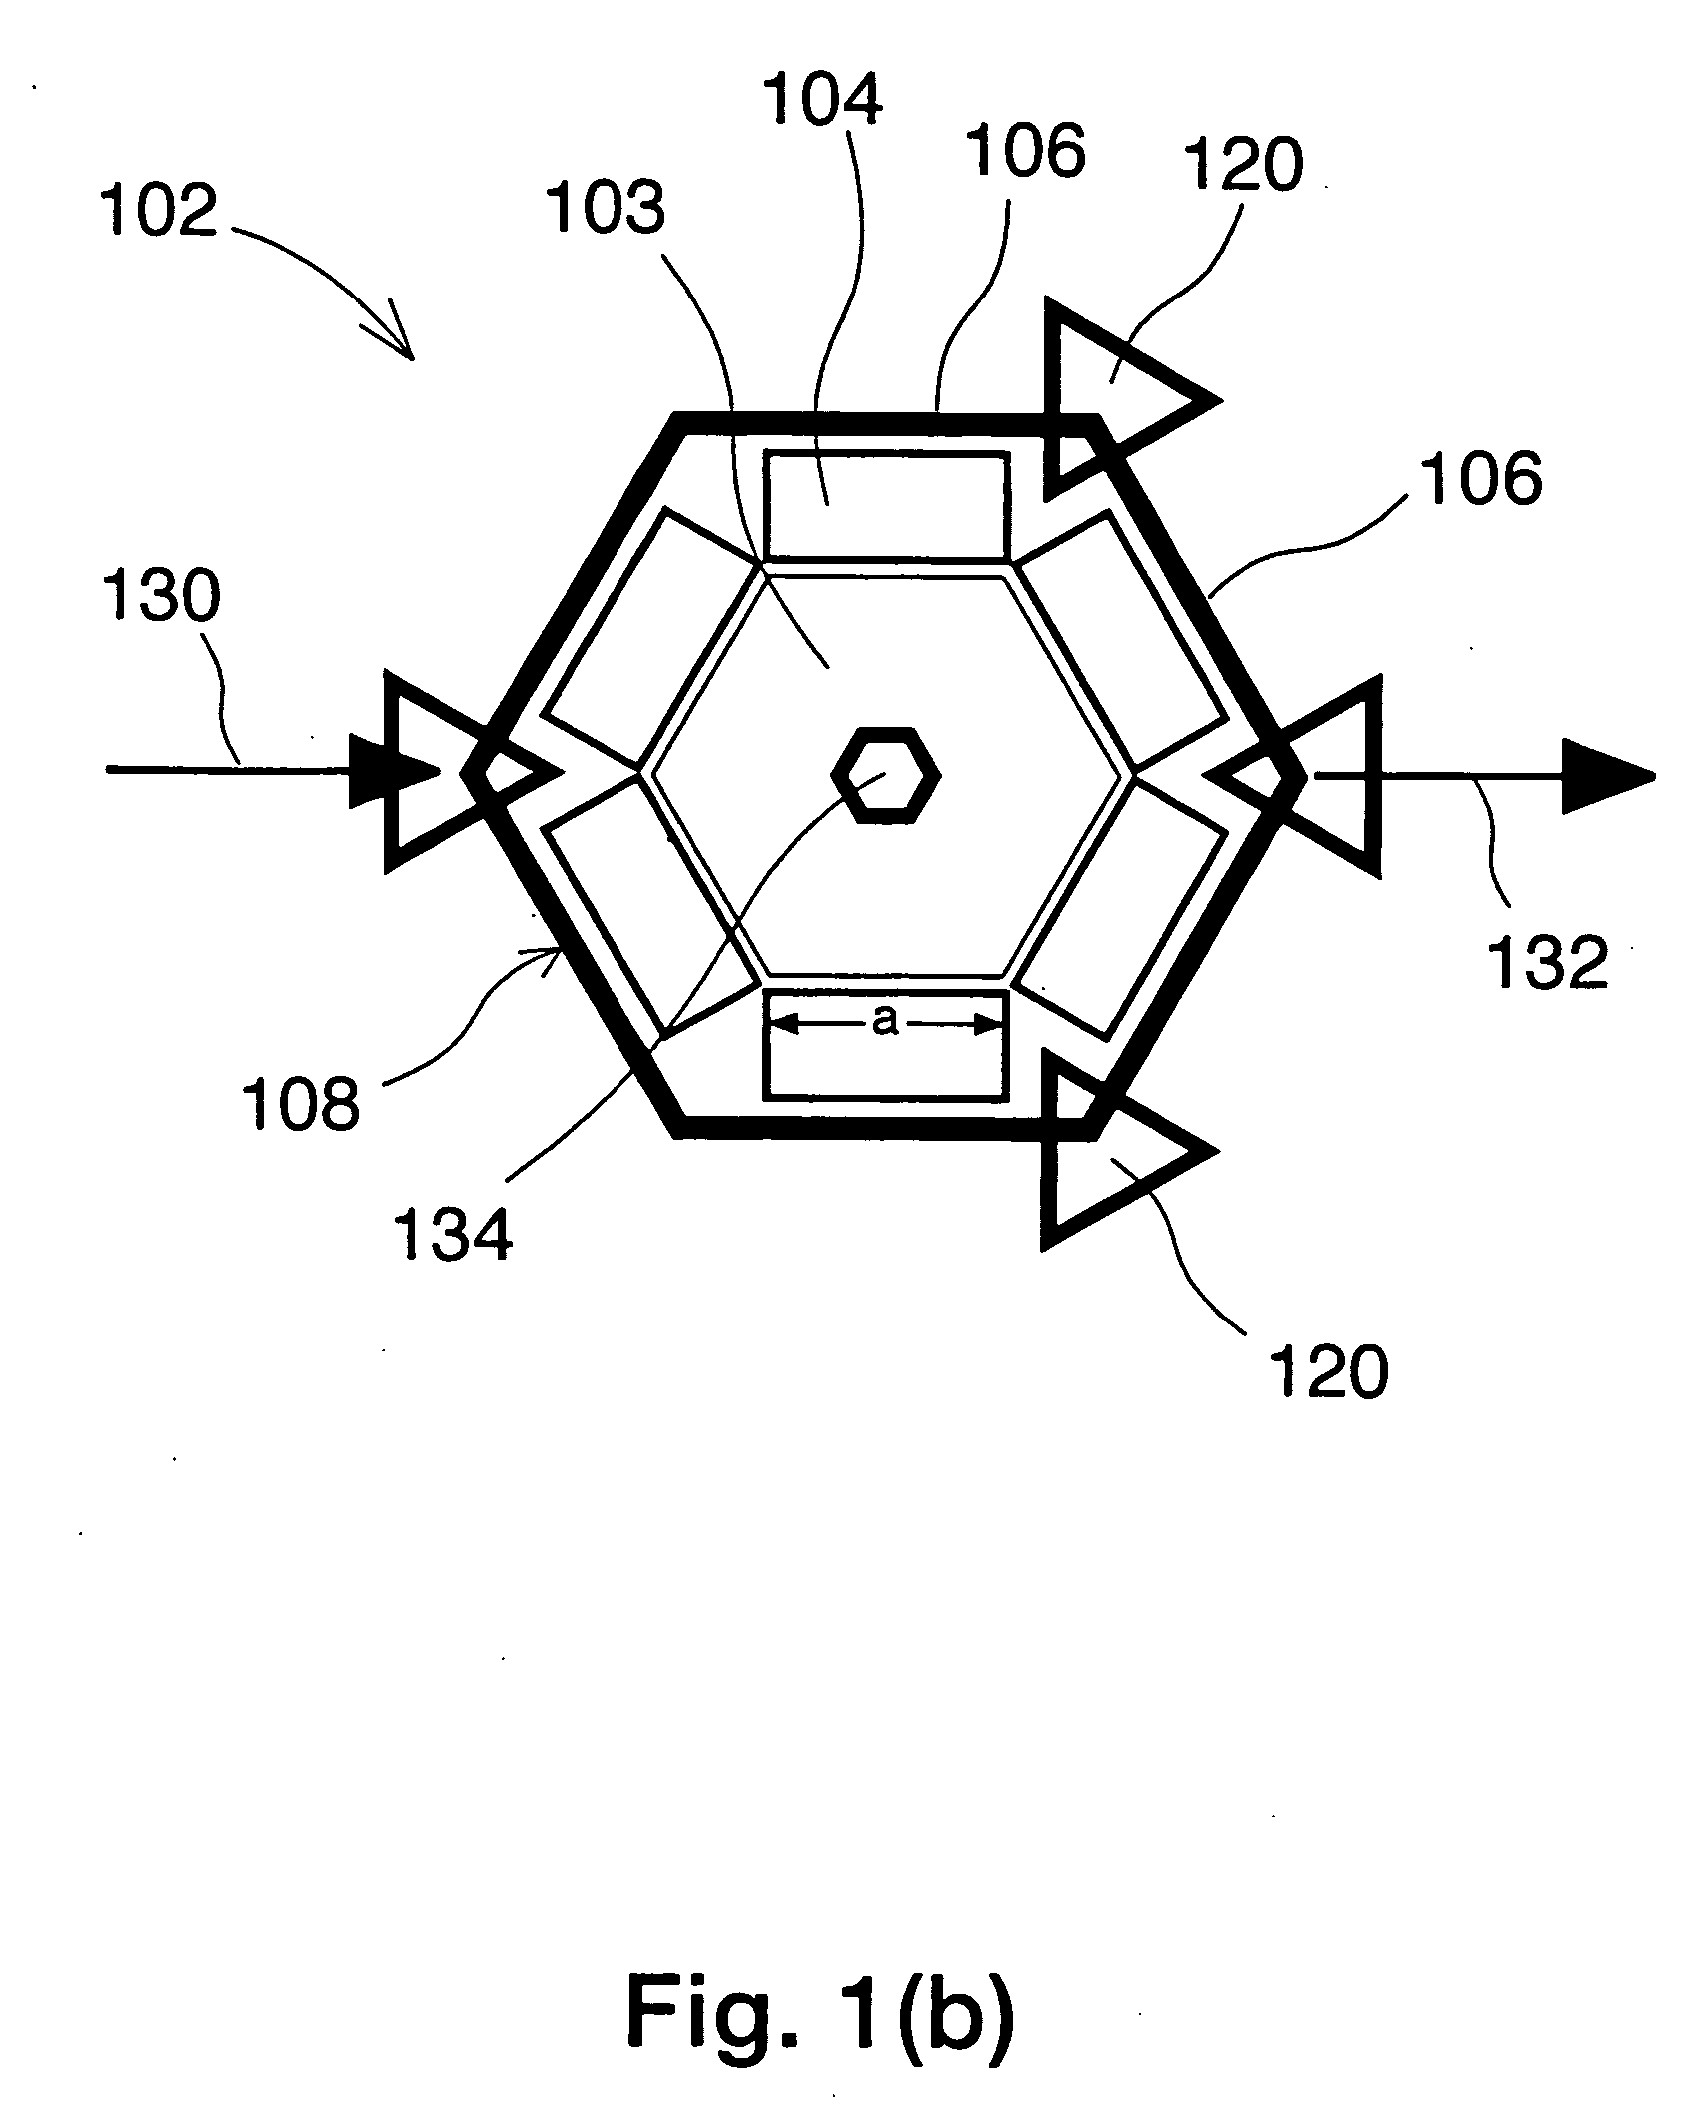 Honeycomb reconfigurable manufacturing system